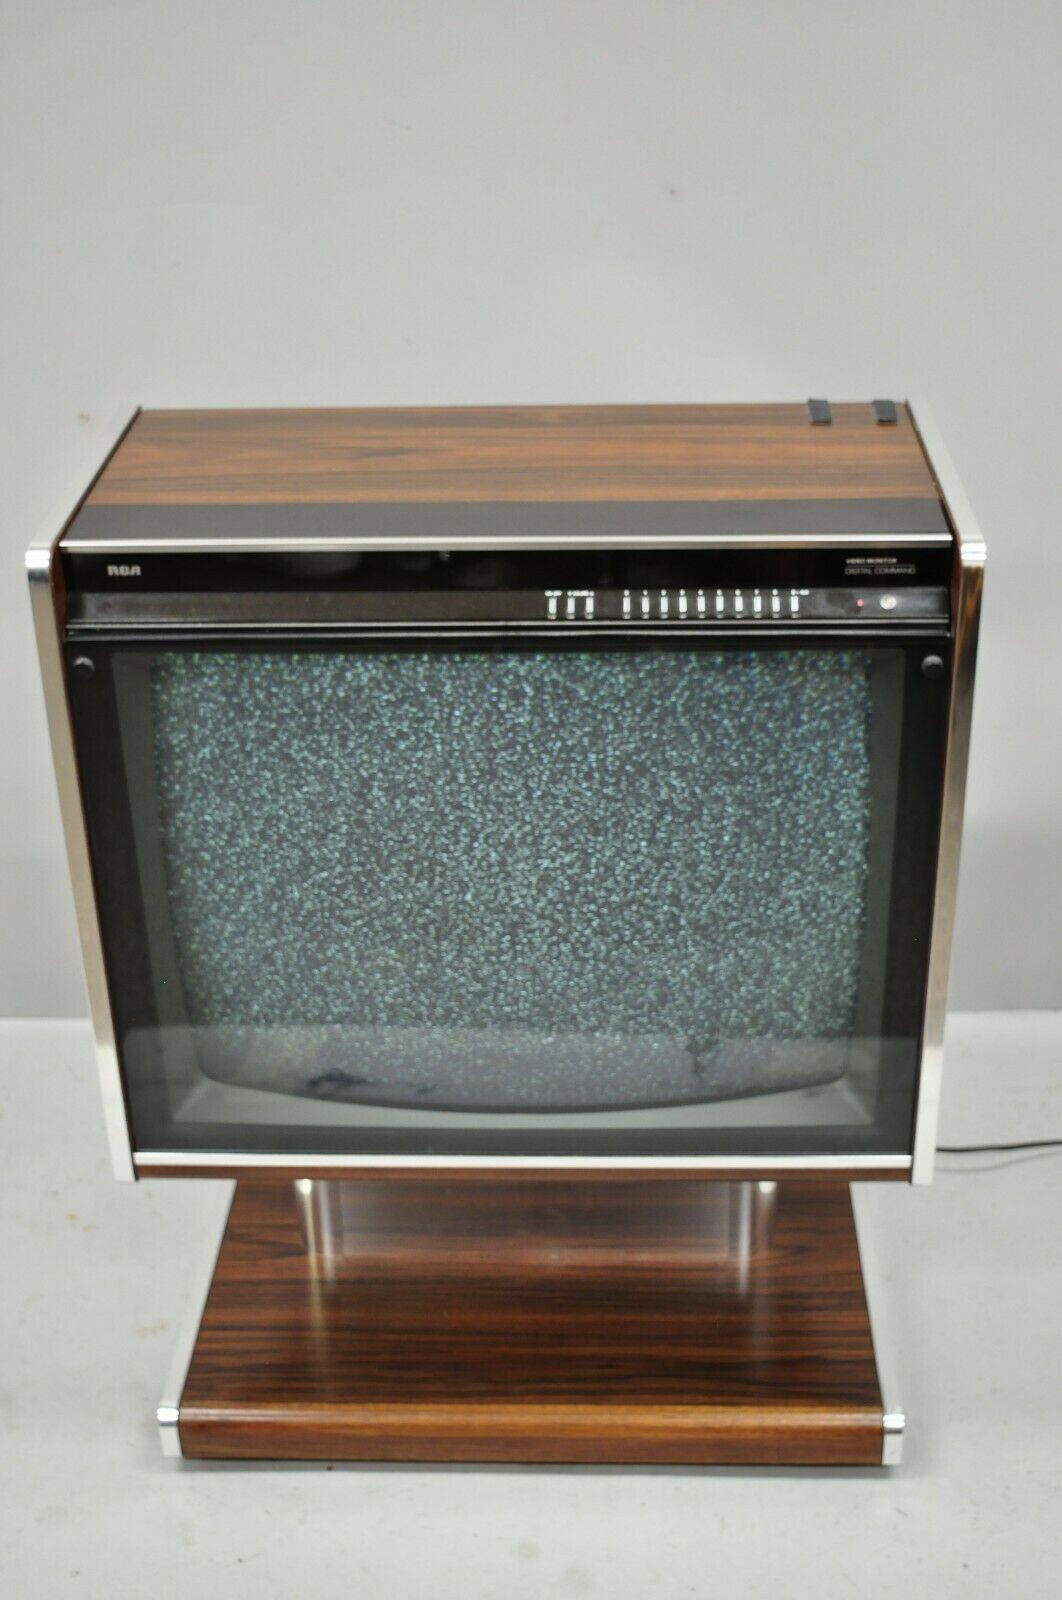 Vintage 1984 RCA Video Monitor Digital Command Space Age Television Console TV 3